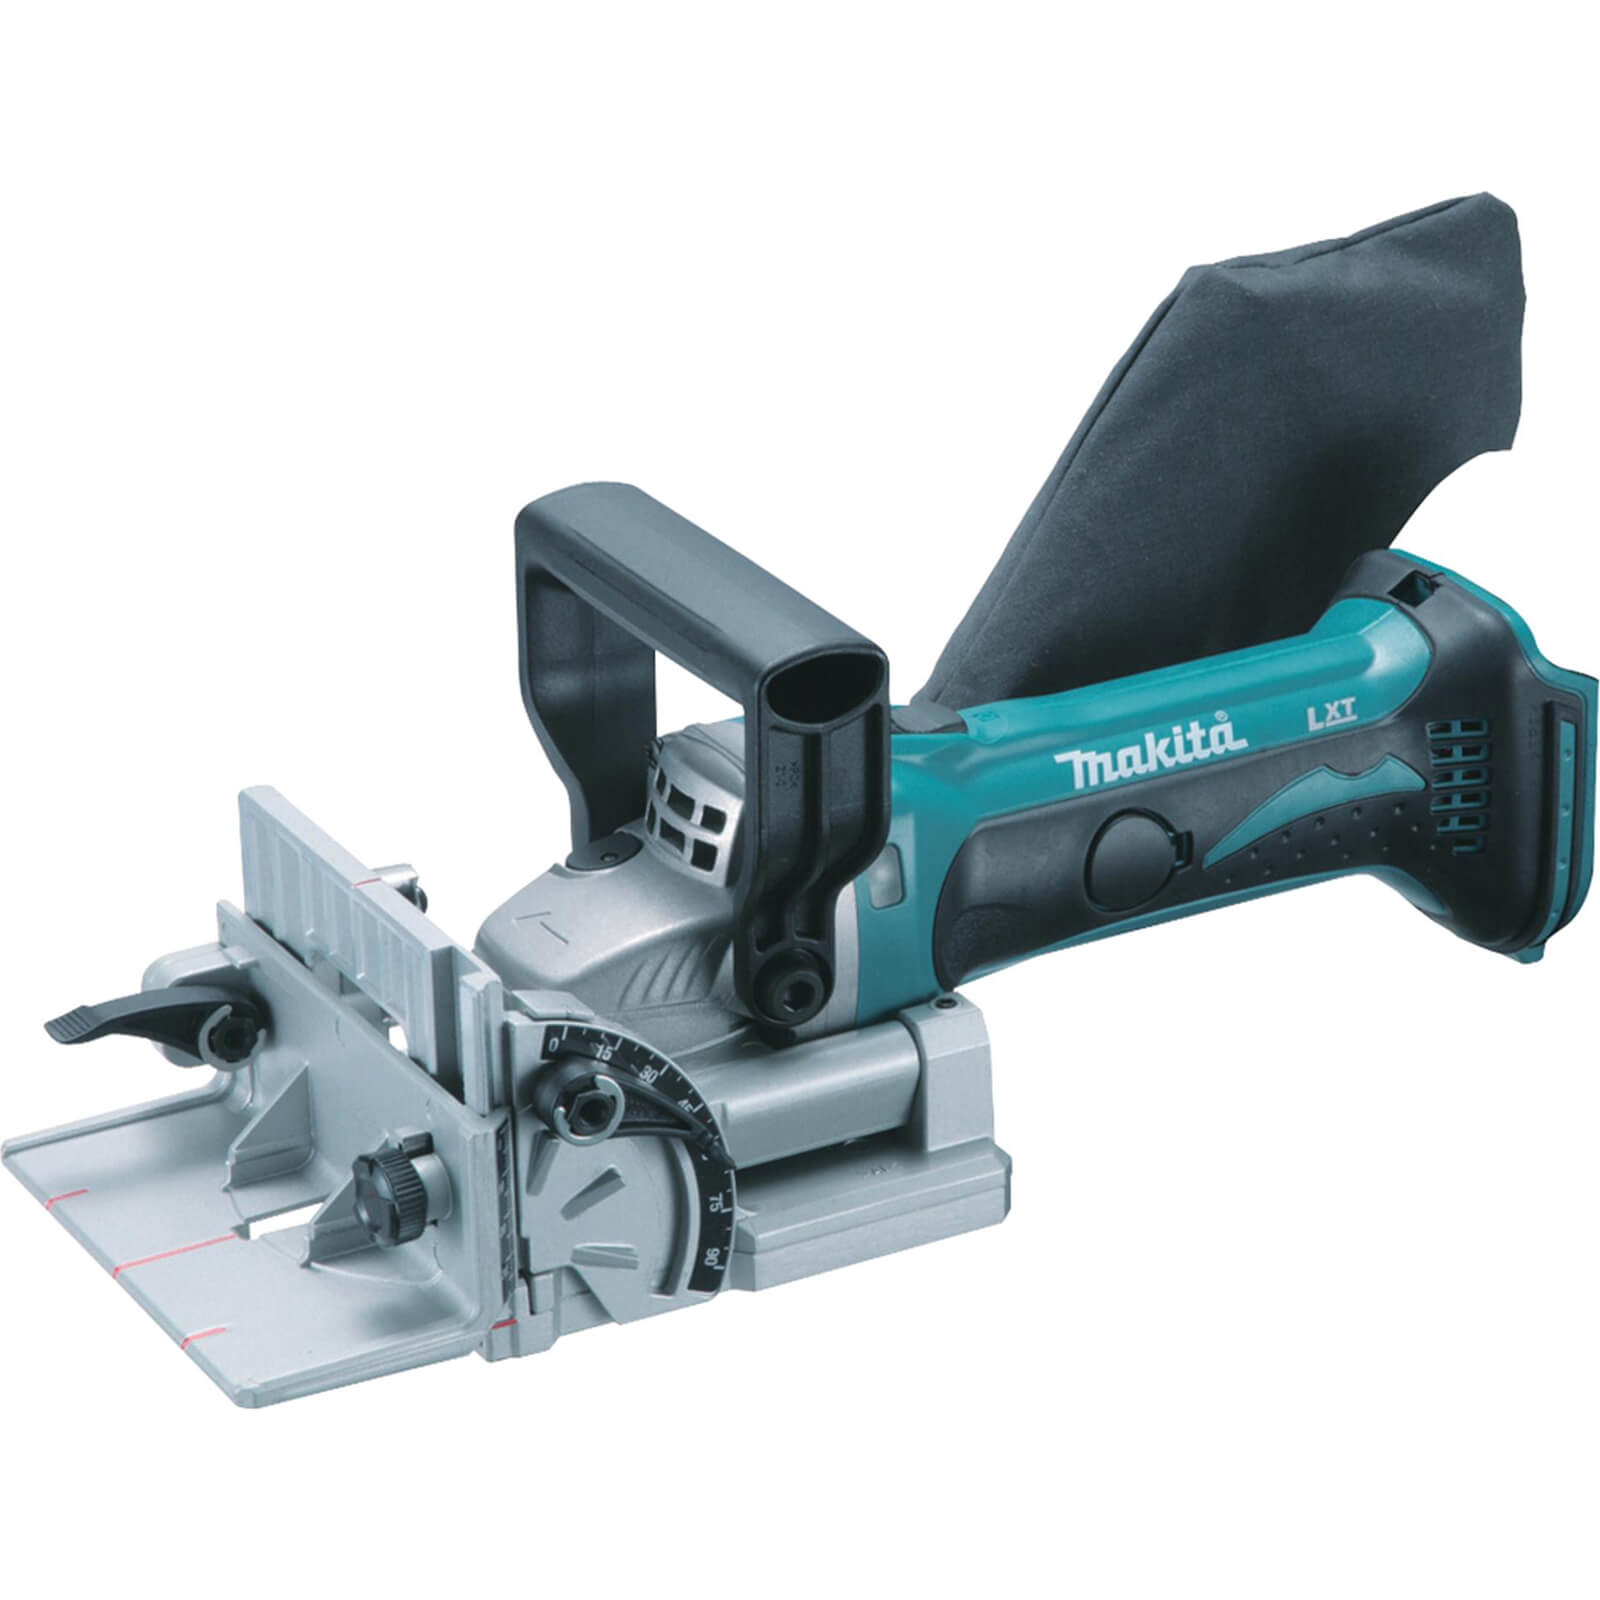 Image of Makita DPJ180 18v LXT Cordless Biscuit Jointer No Batteries No Charger No Case